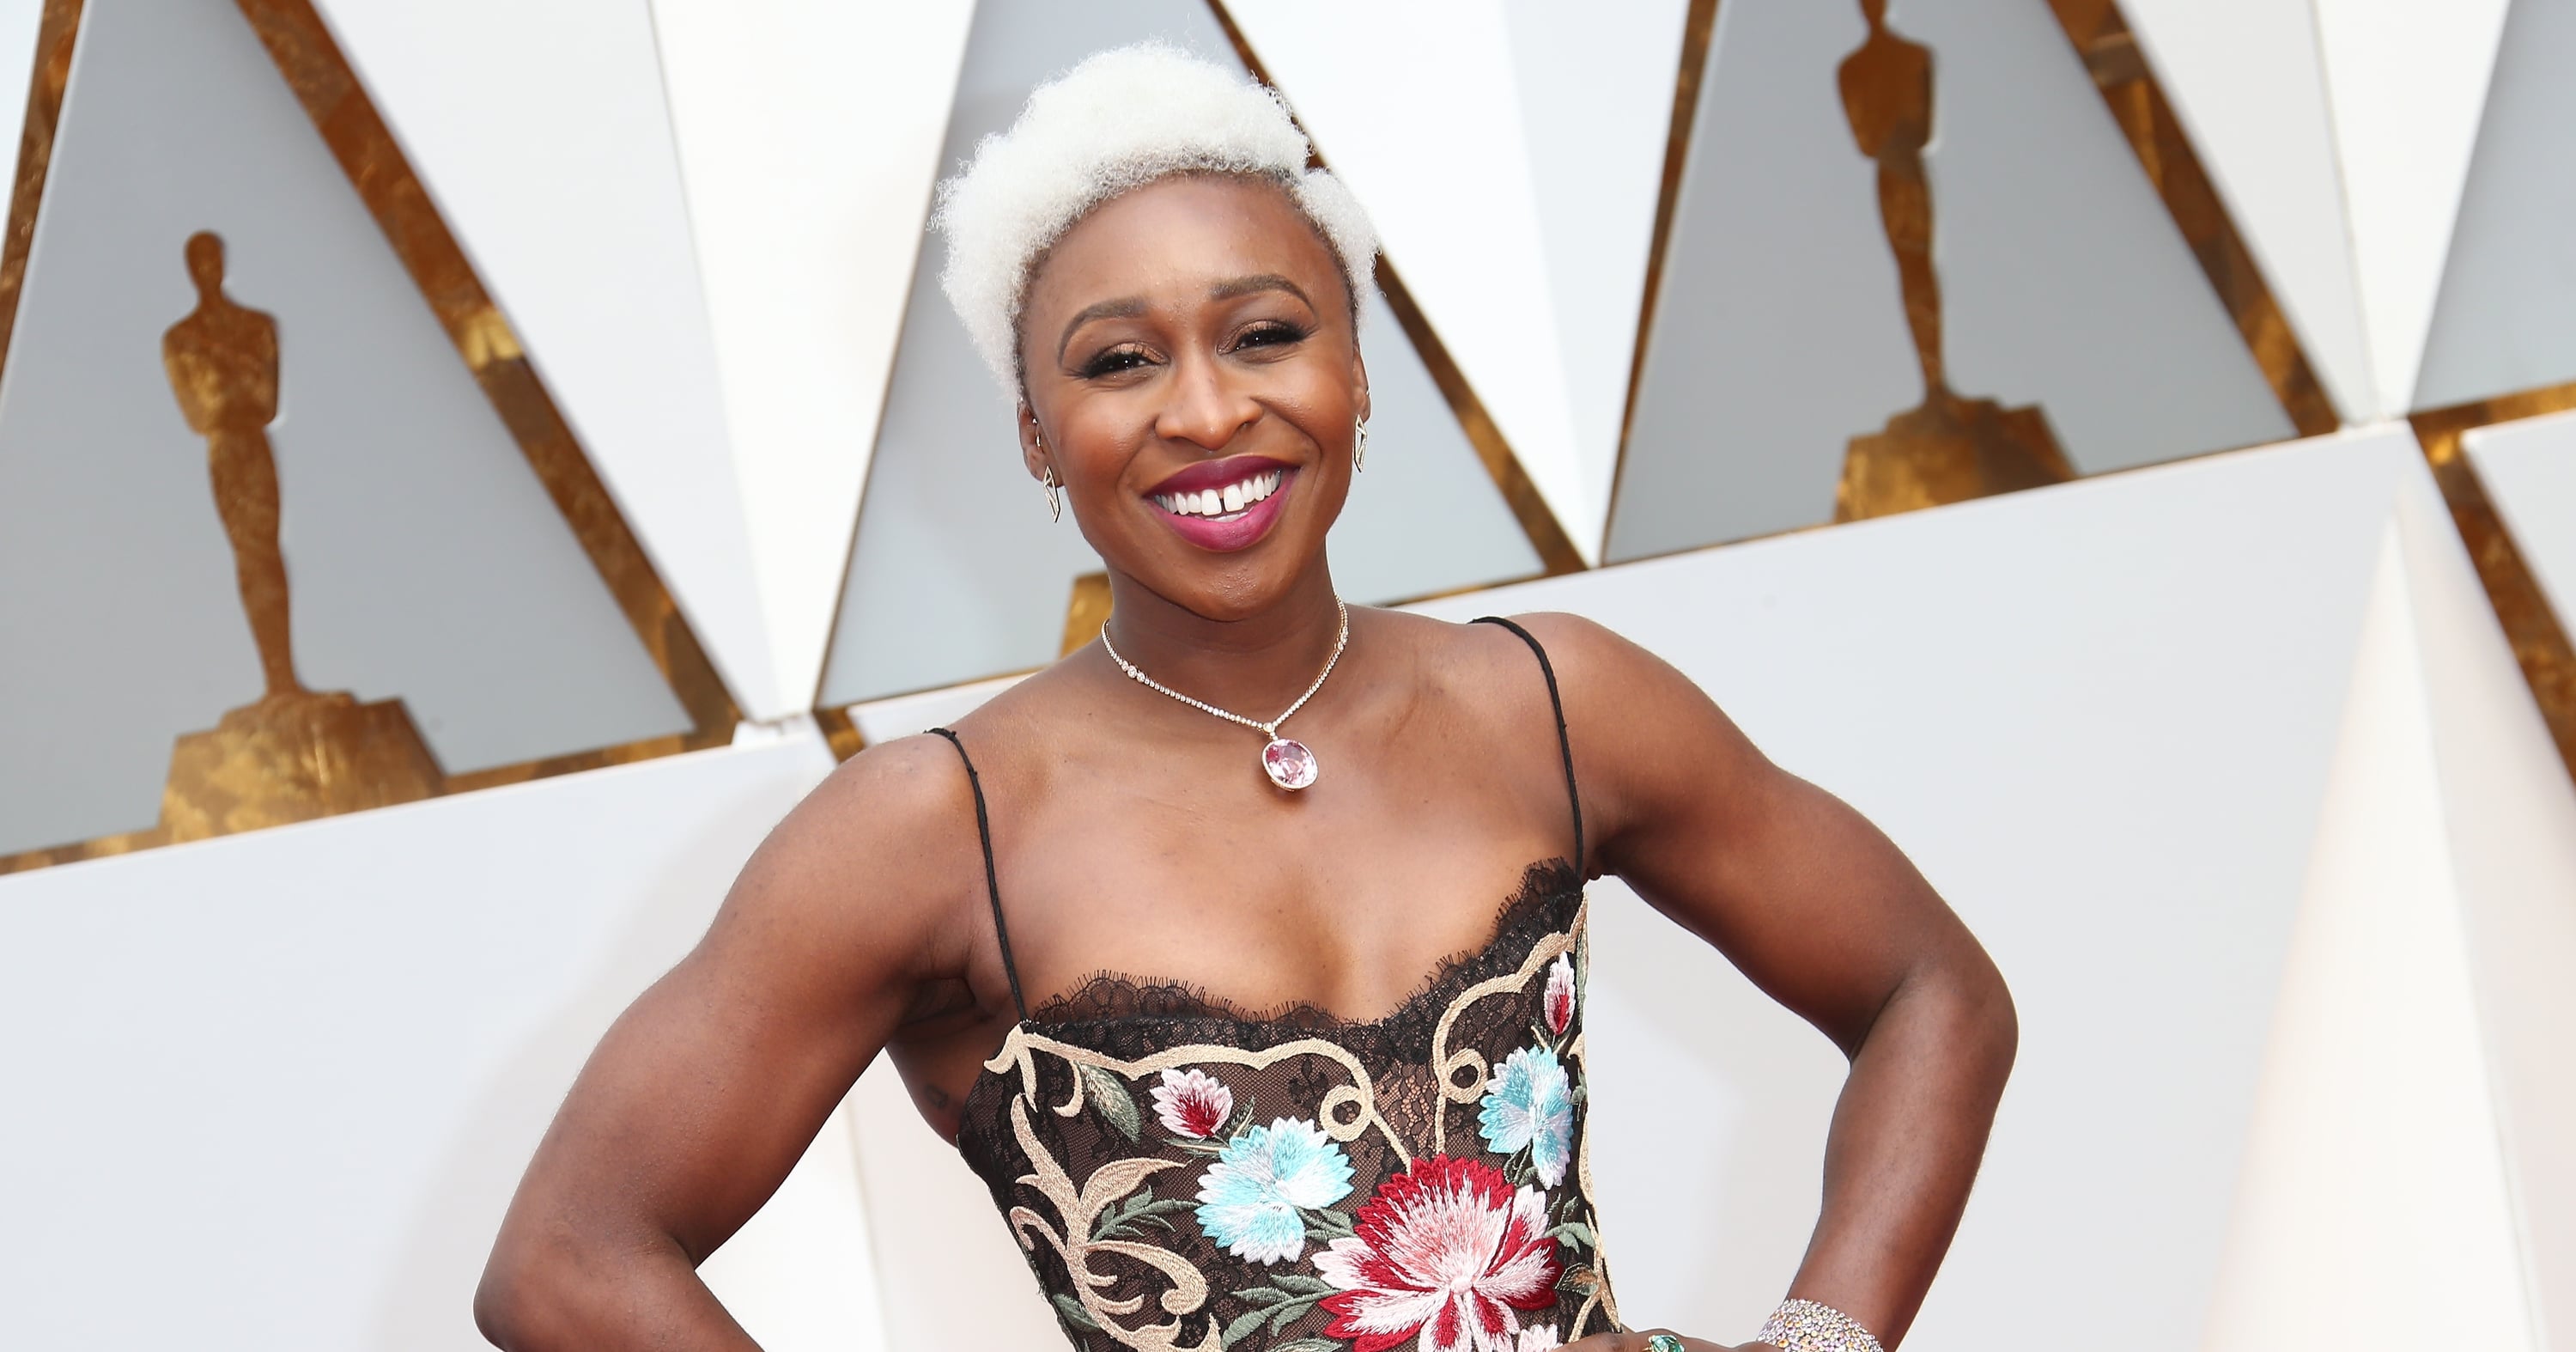 Cynthia Erivo Nails the Quiet-Luxury Trend at the Alvin Ailey Gala